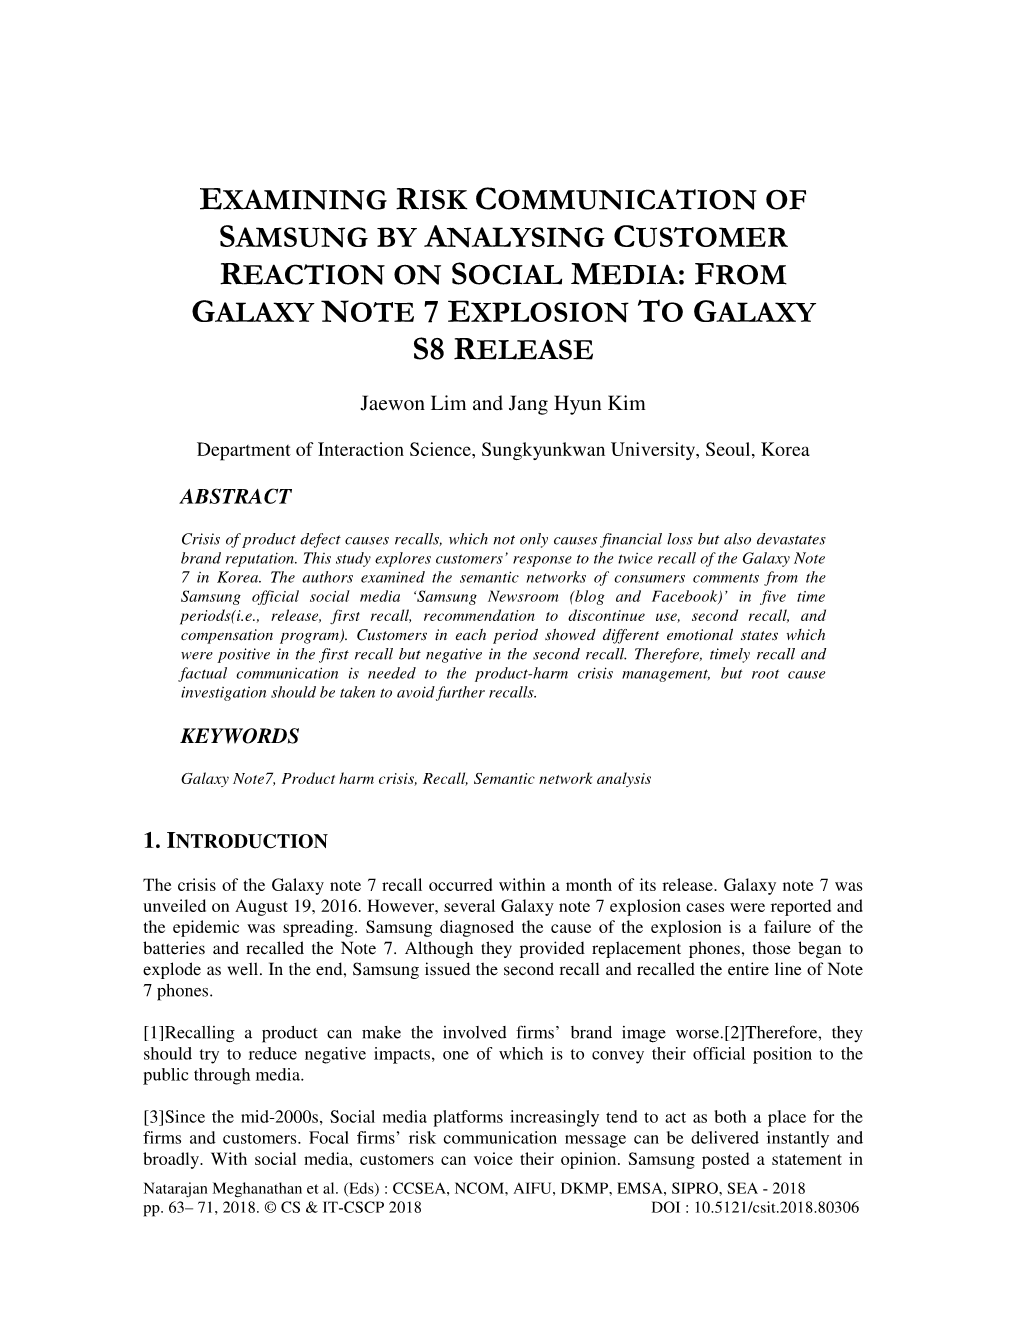 Examining Risk Communication of Samsung by Analysing Customer Reaction on Social Media : F Rom Galaxy Note 7 E Xplosion to Galaxy S8 R Elease